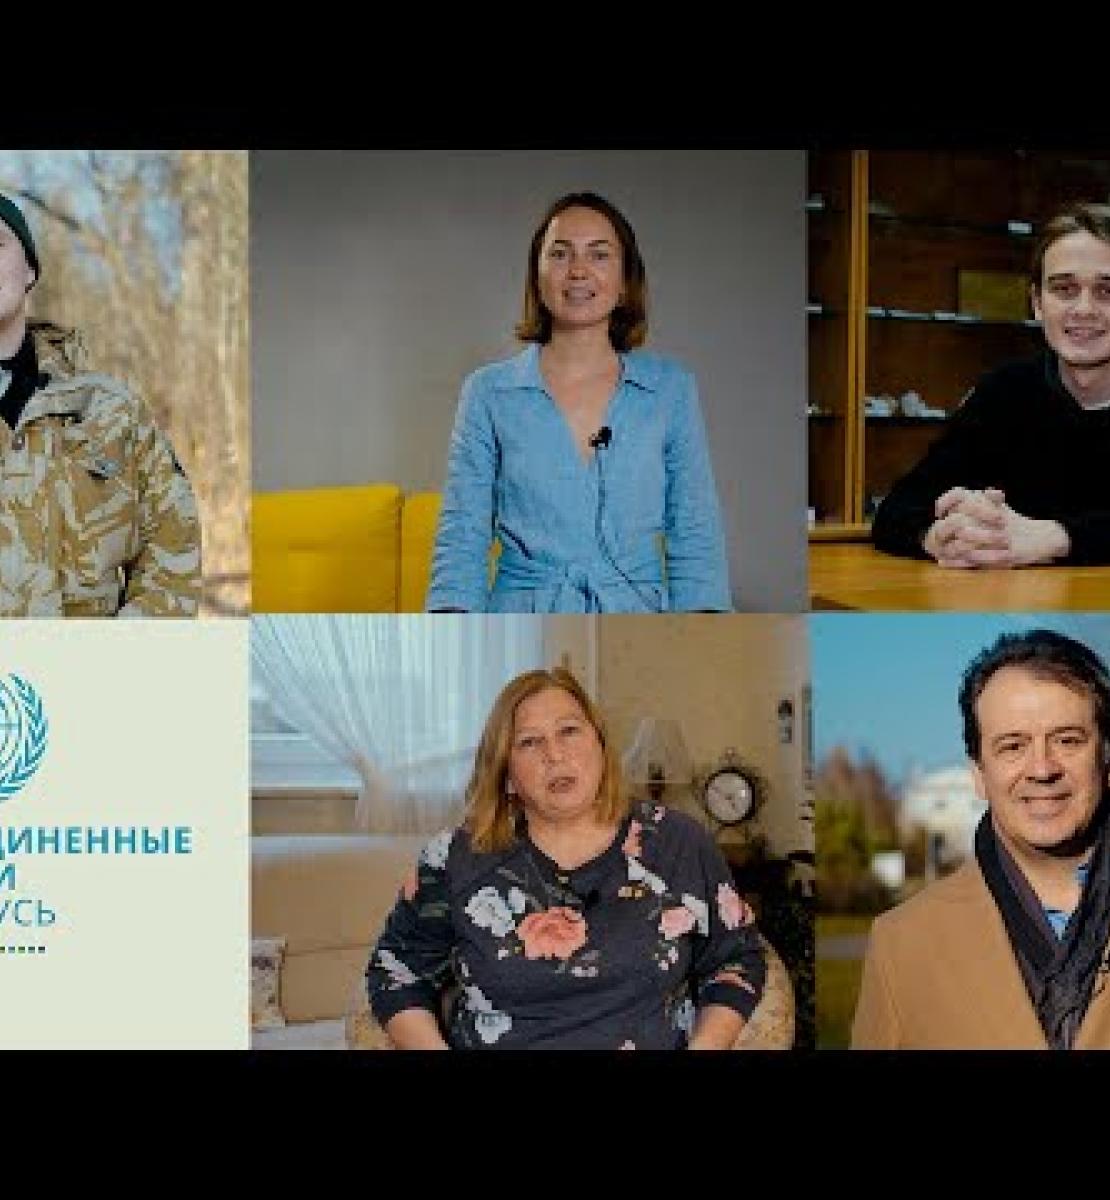 Everyone has a role to play in mitigating climate change: Video from UN Belarus 